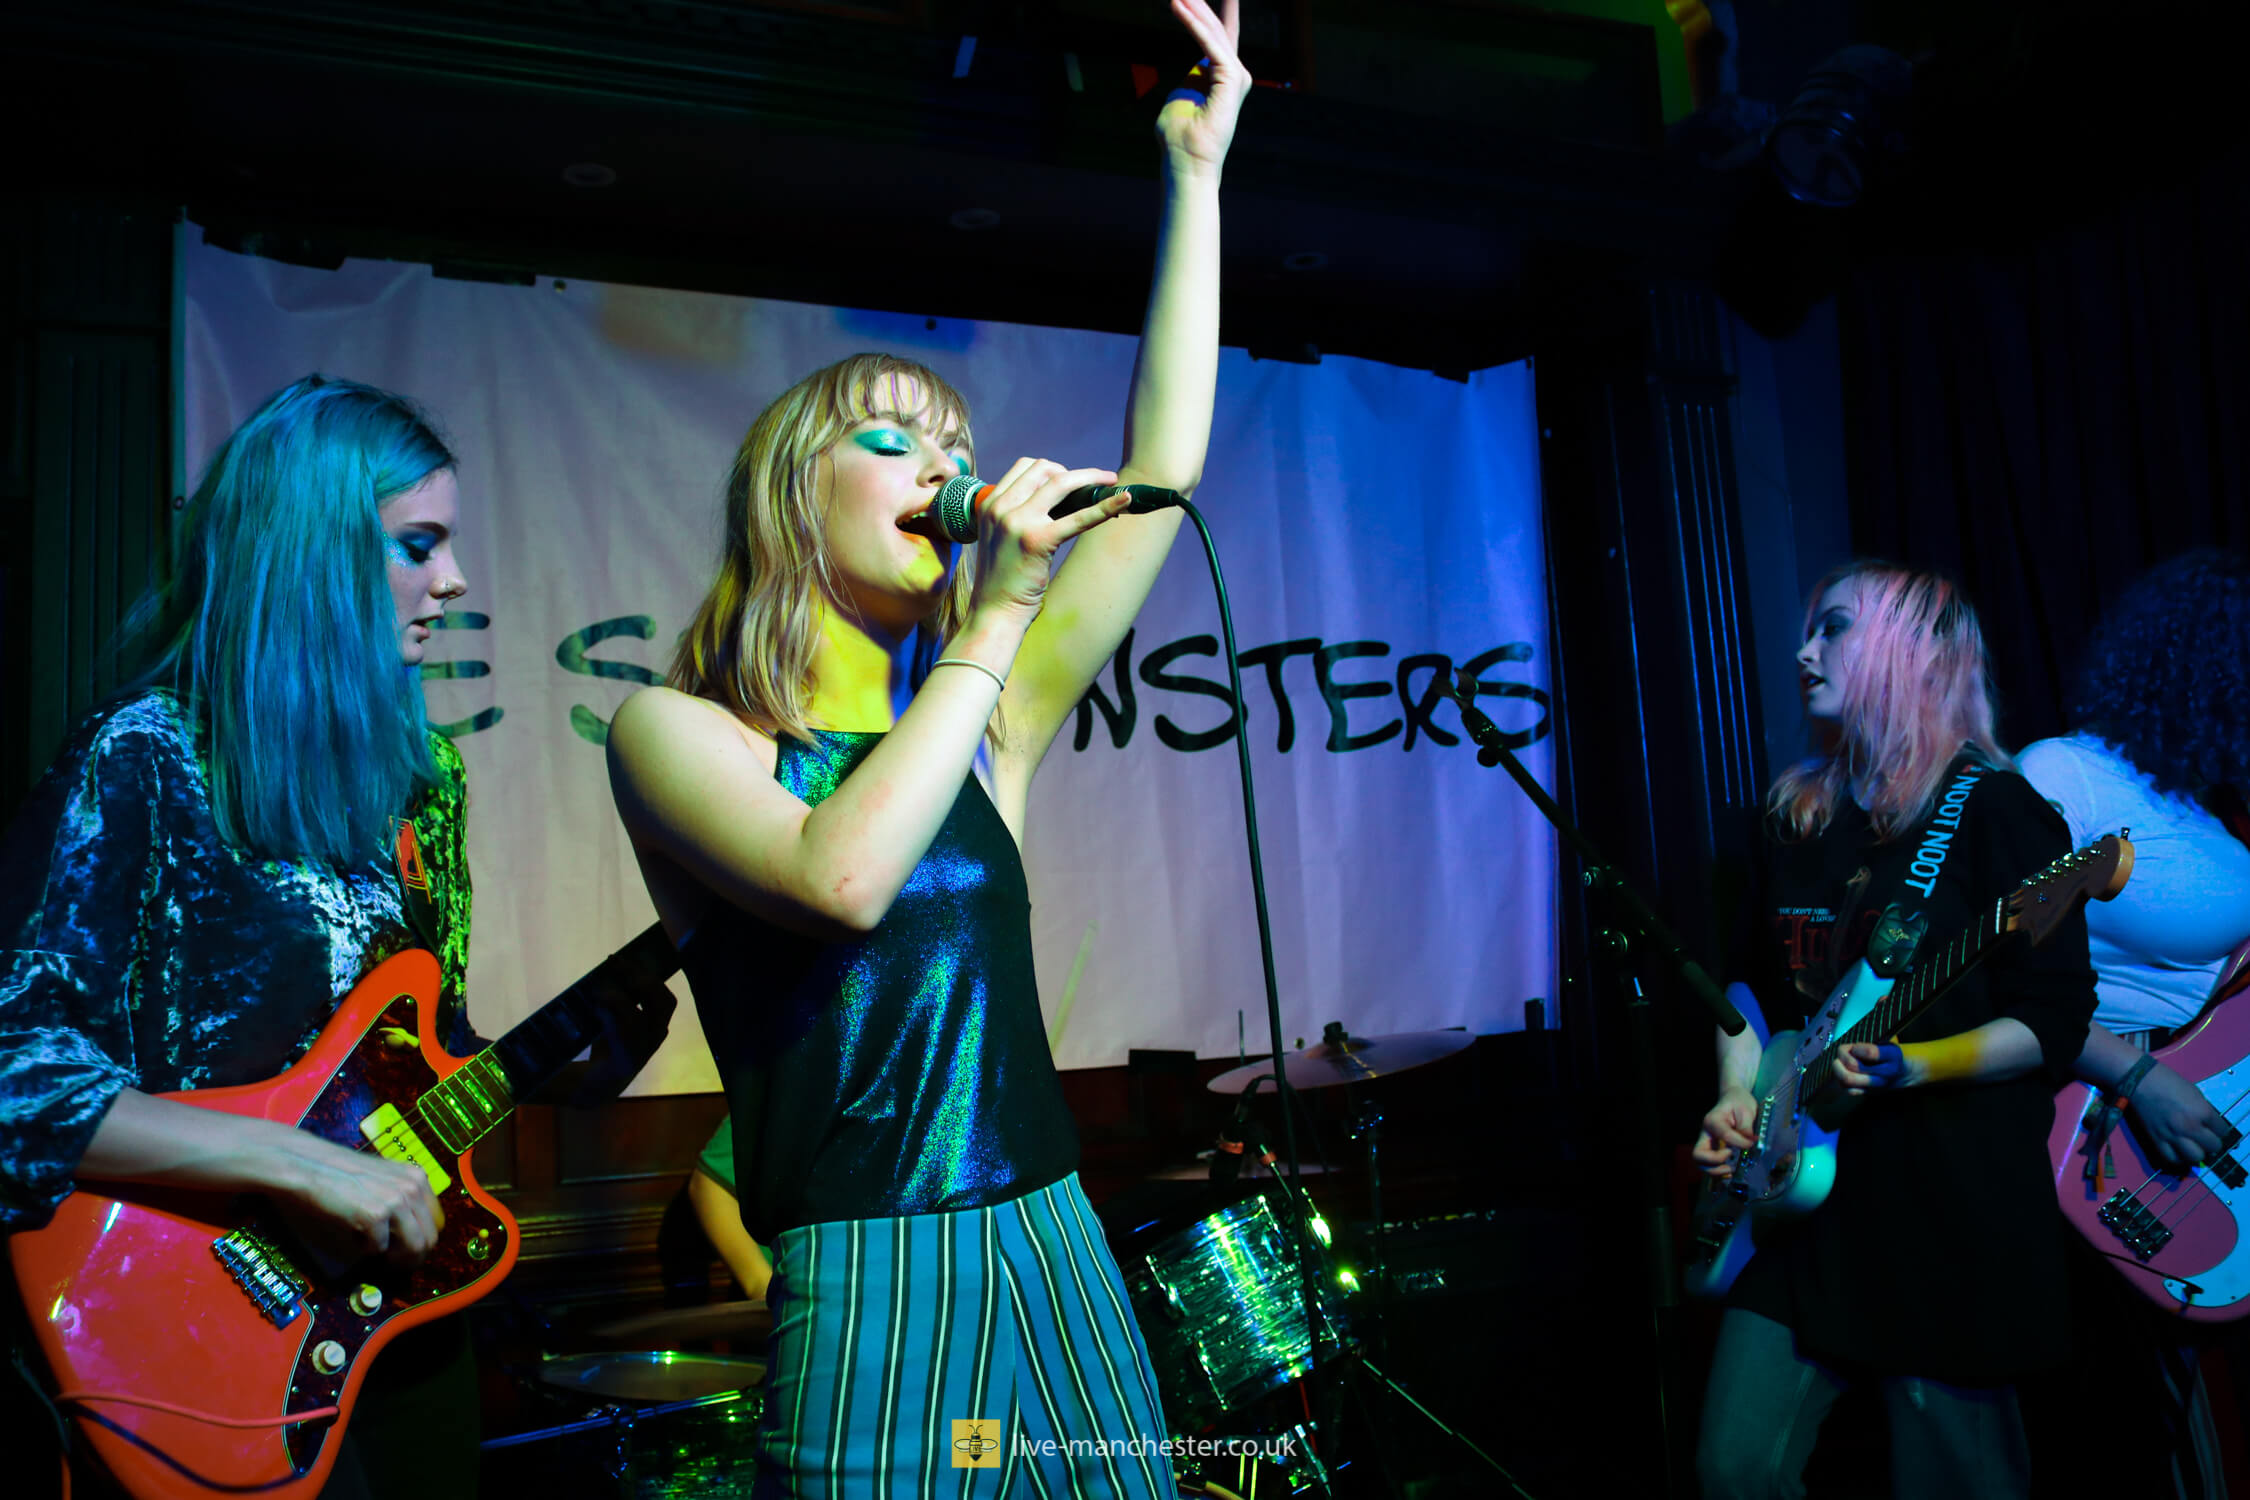 The Seamonsters at The Castle Manchester